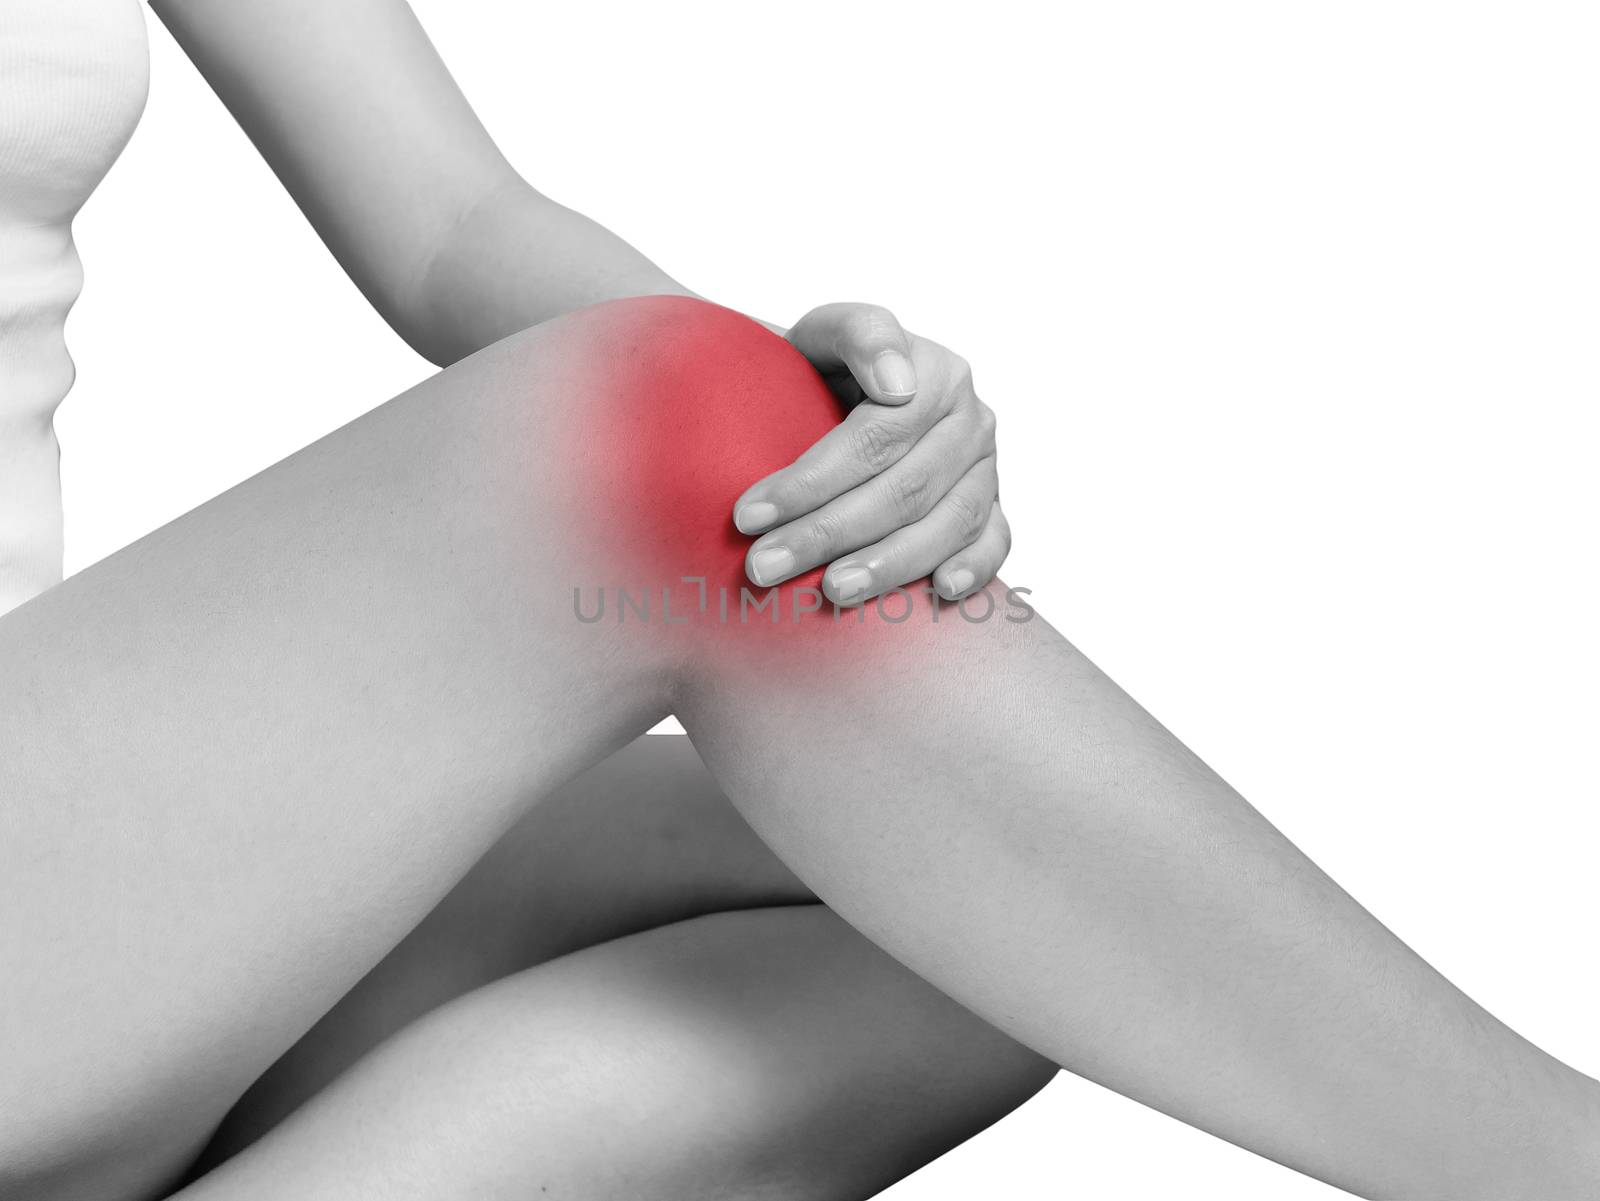 woman suffering from knee pain, joint pains. mono tone highlight at knee isolated on white background. health care and medical concept by asiandelight